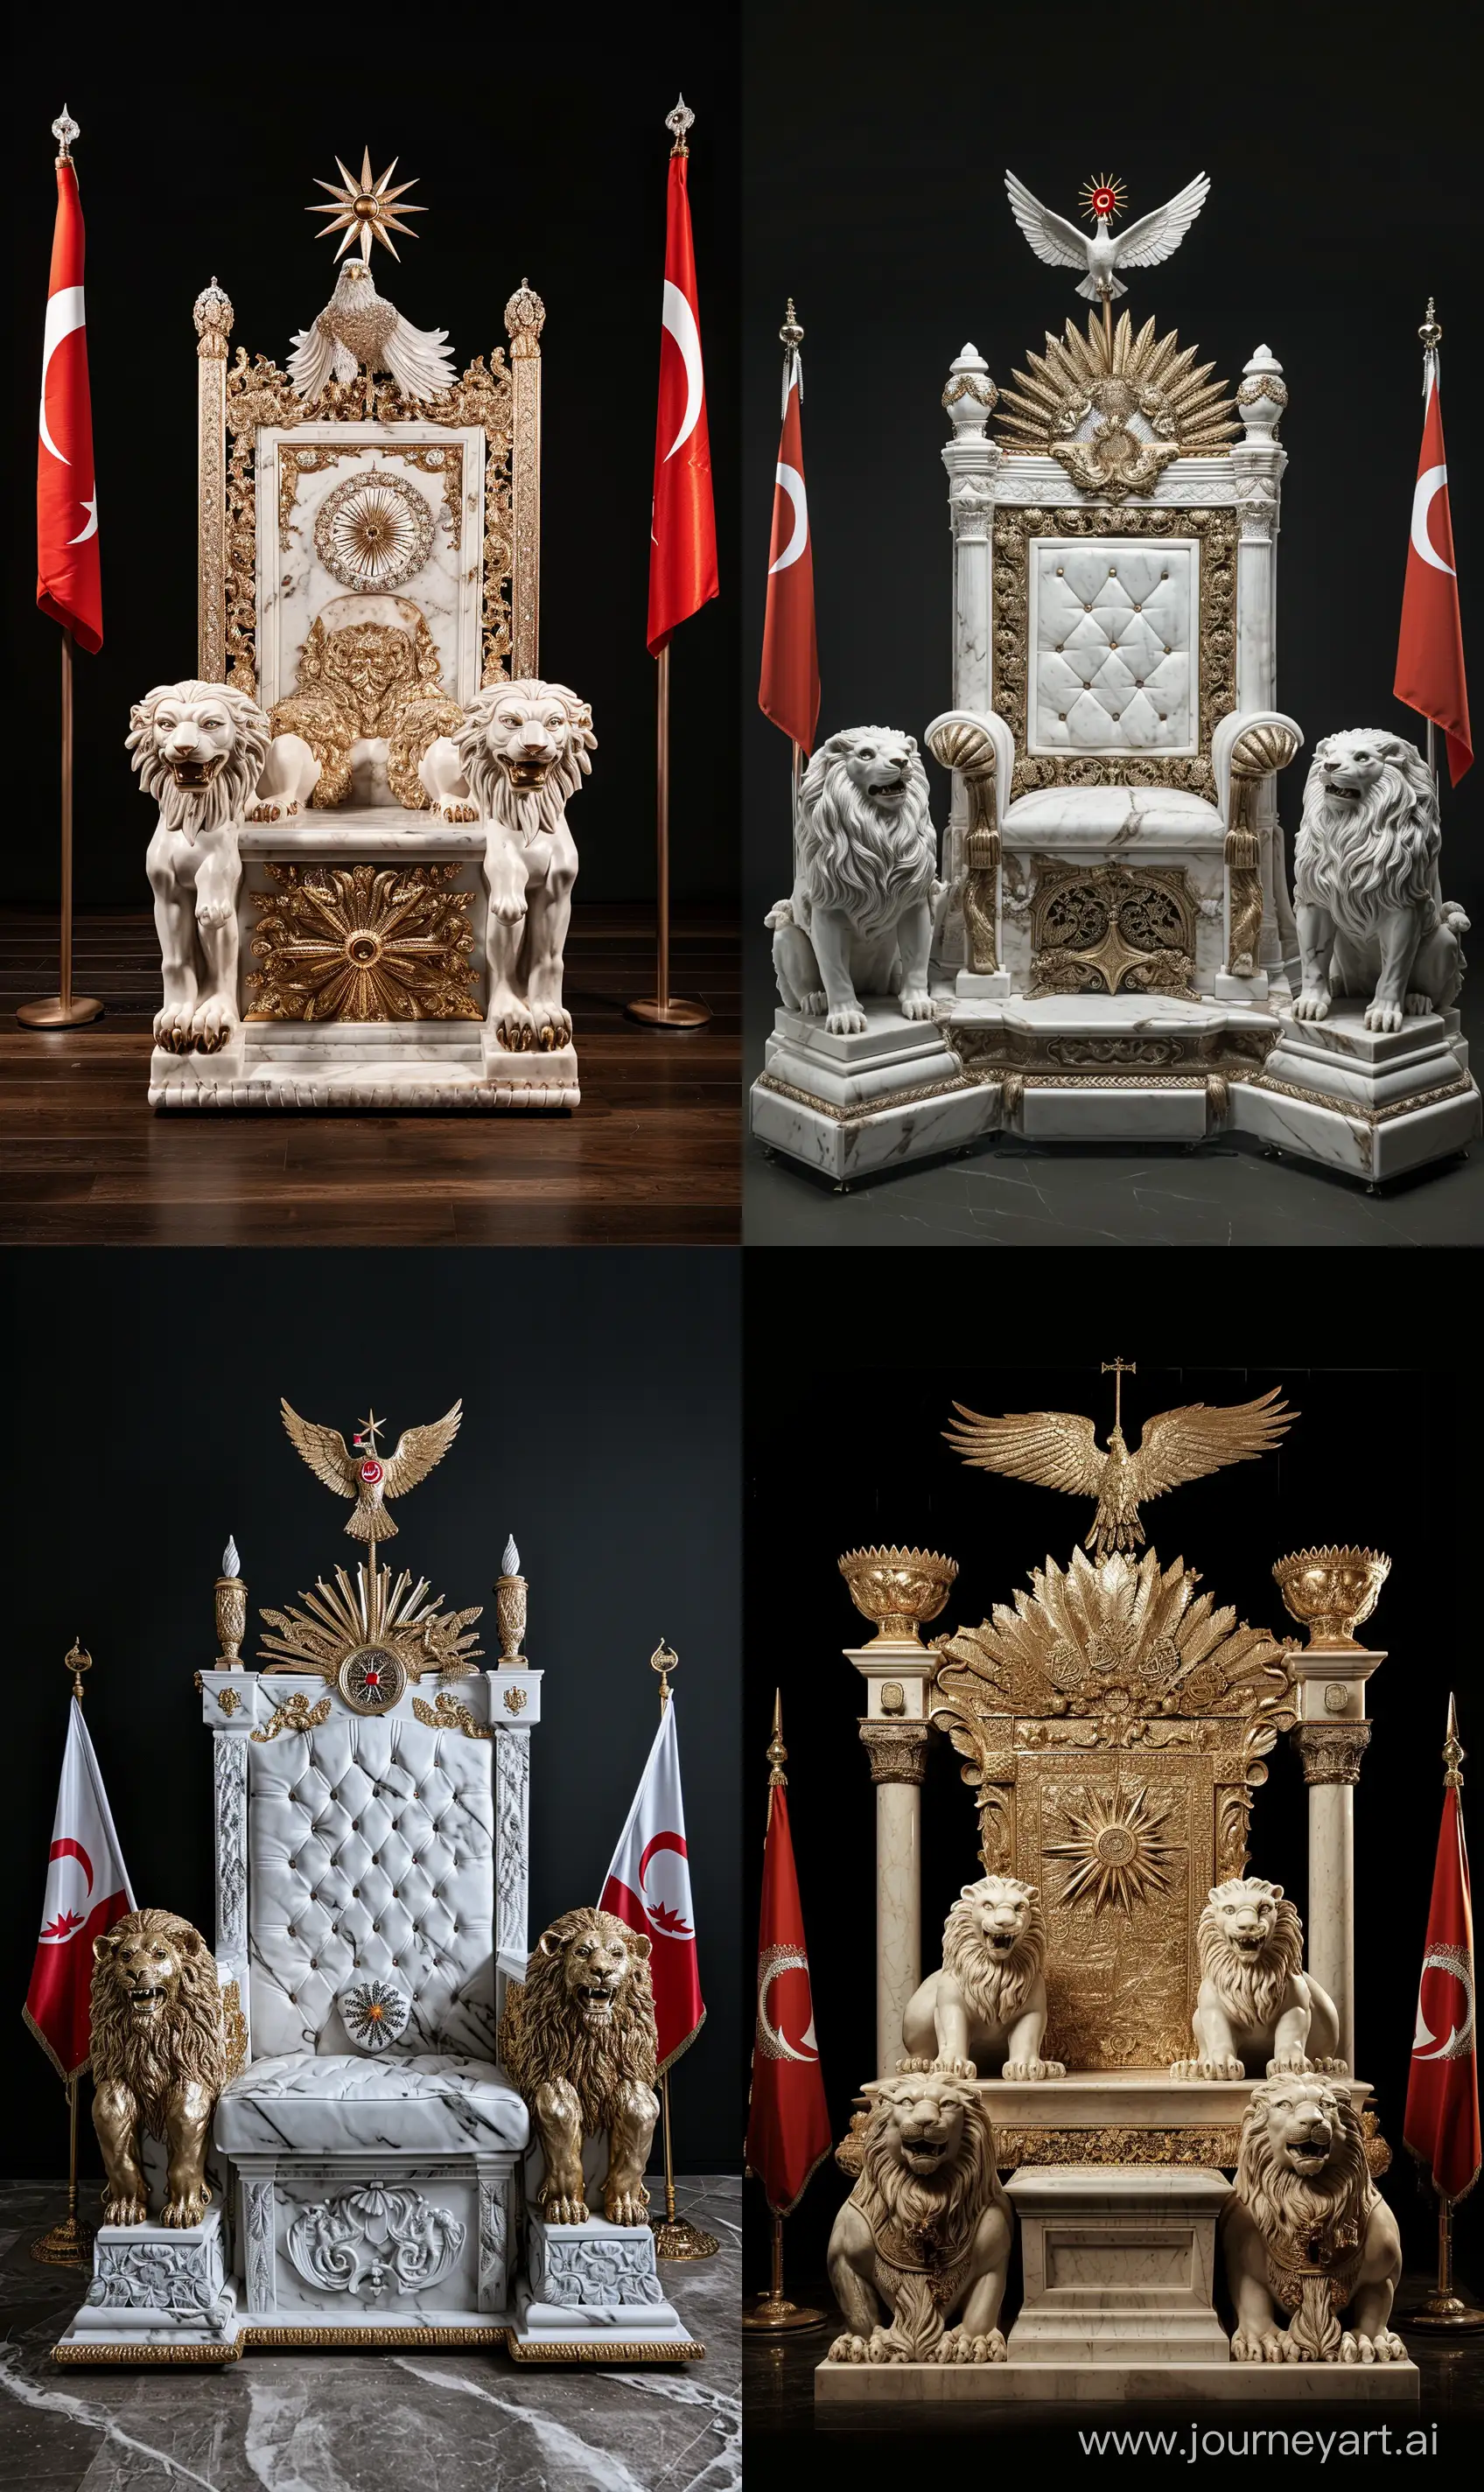 Islamic-Throne-with-Roaring-Lions-and-Eagle-Sculptures